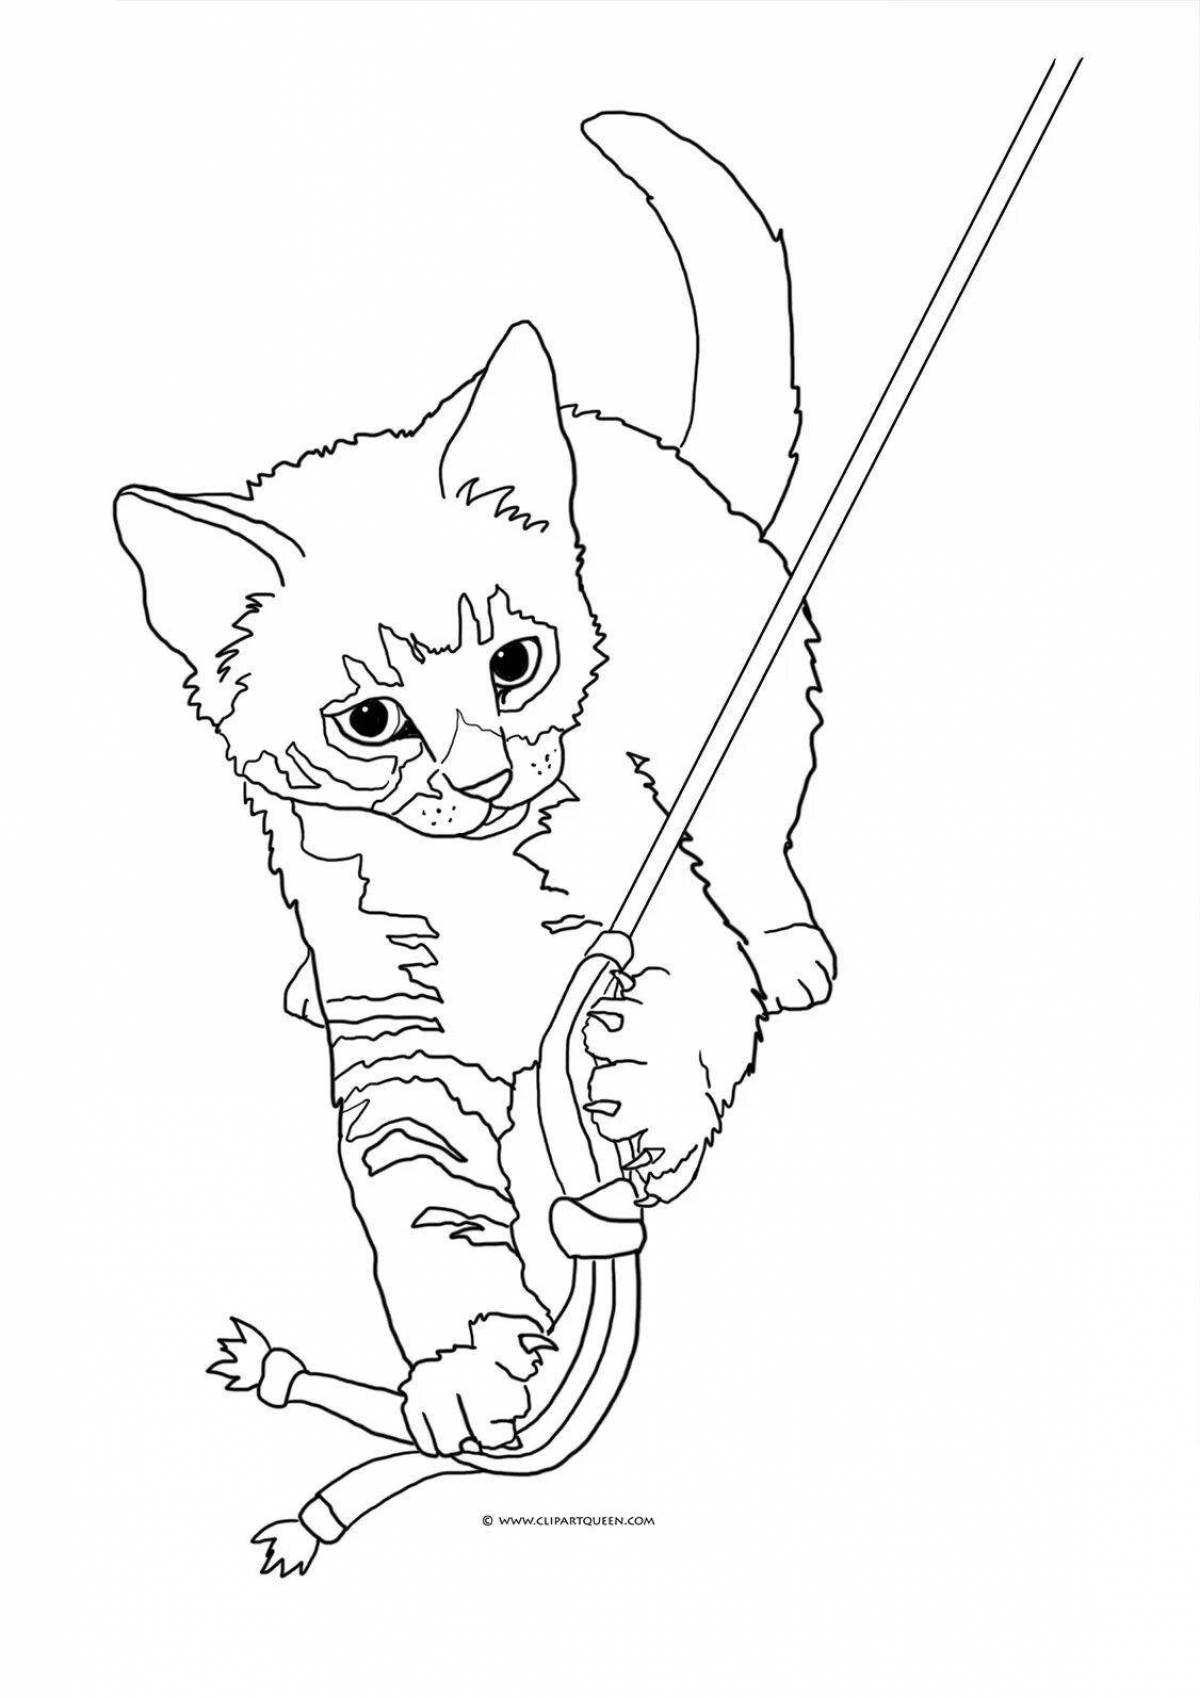 Round fat kitten coloring page